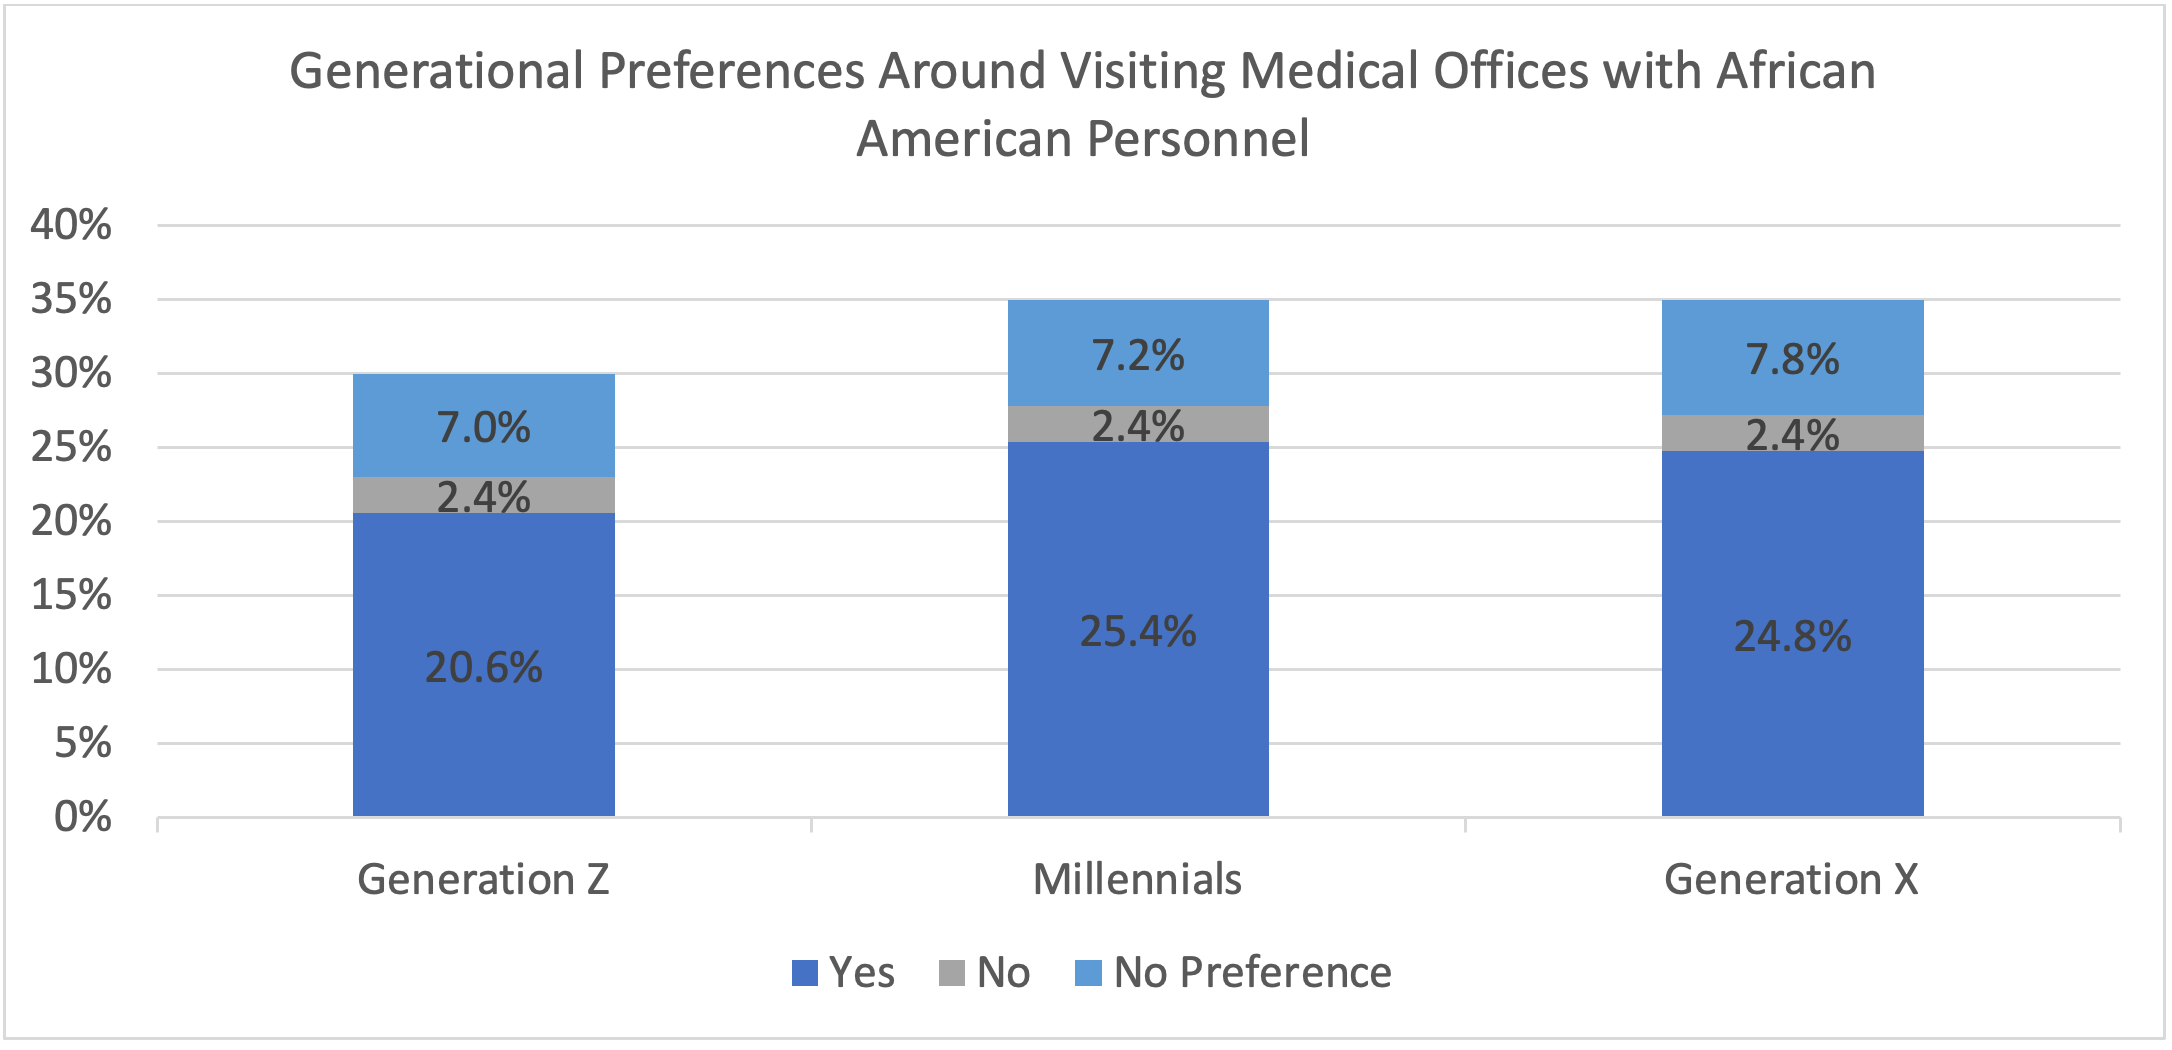 Table 5. Generational Preferences Around Visiting Medical Offices with African American Personnel